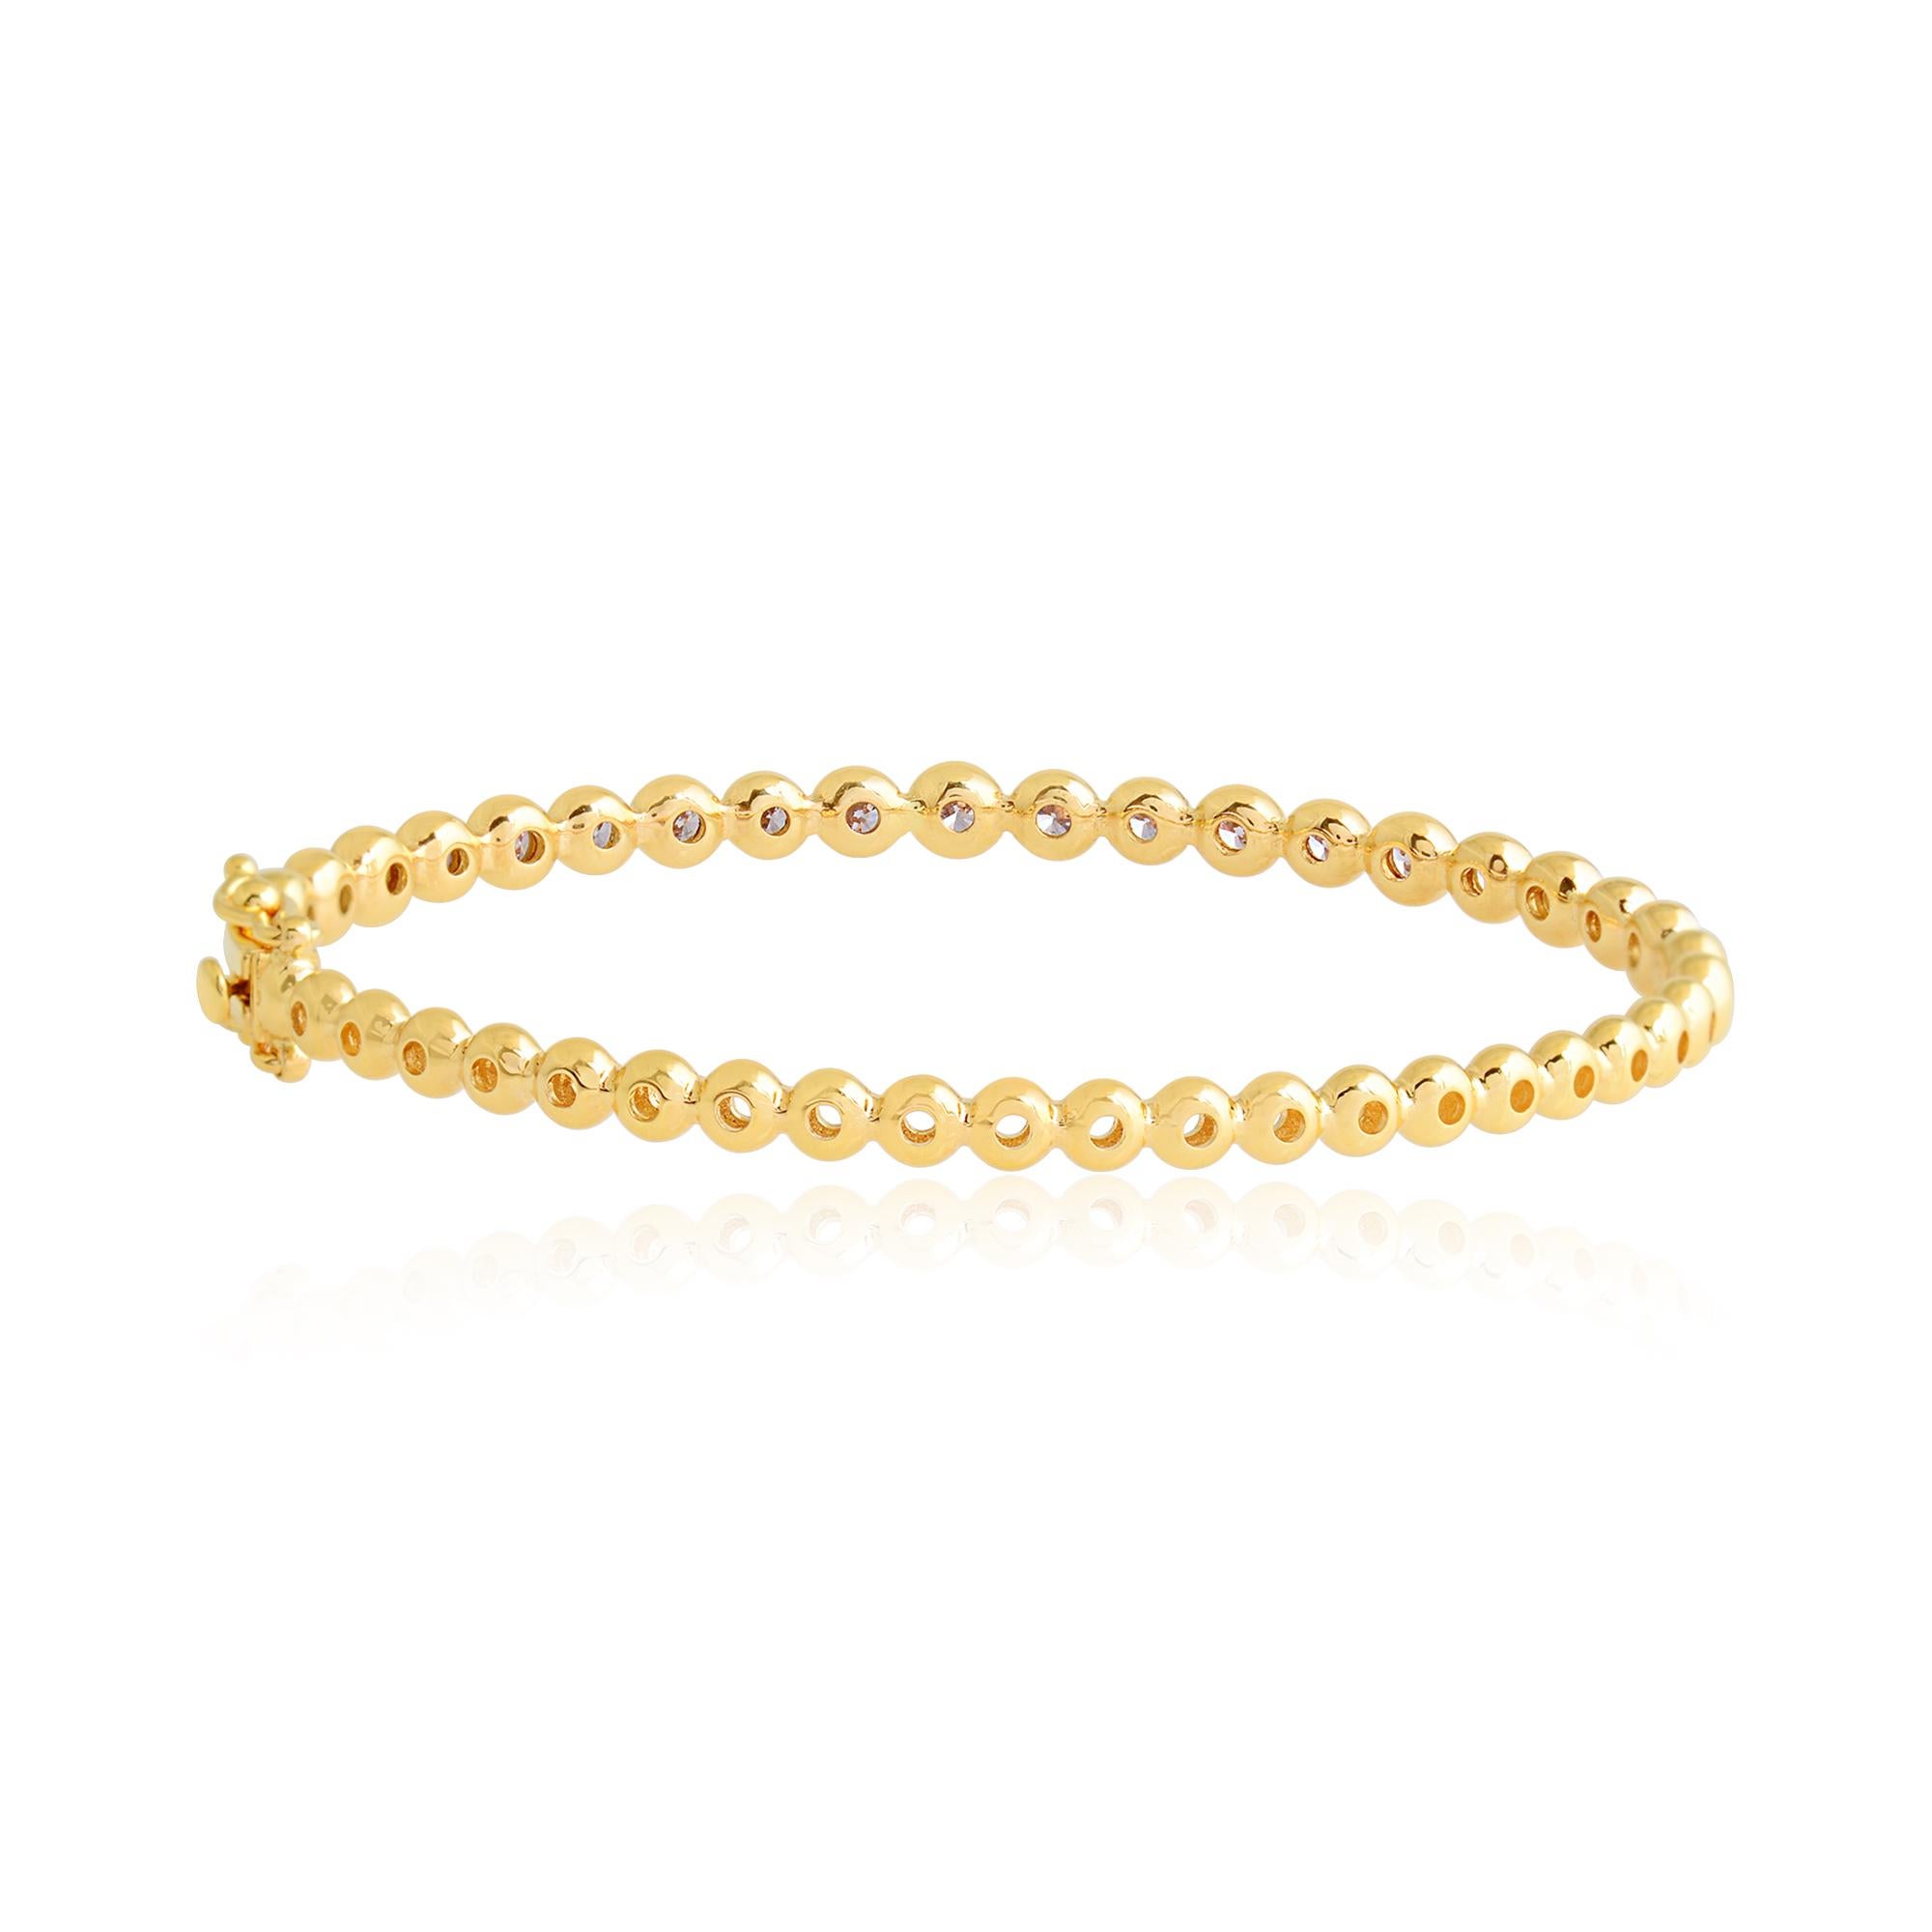 Round Cut 2.50 Carat Single Line Natural Diamond Bracelet Solid 14k Yellow Gold Jewelry For Sale